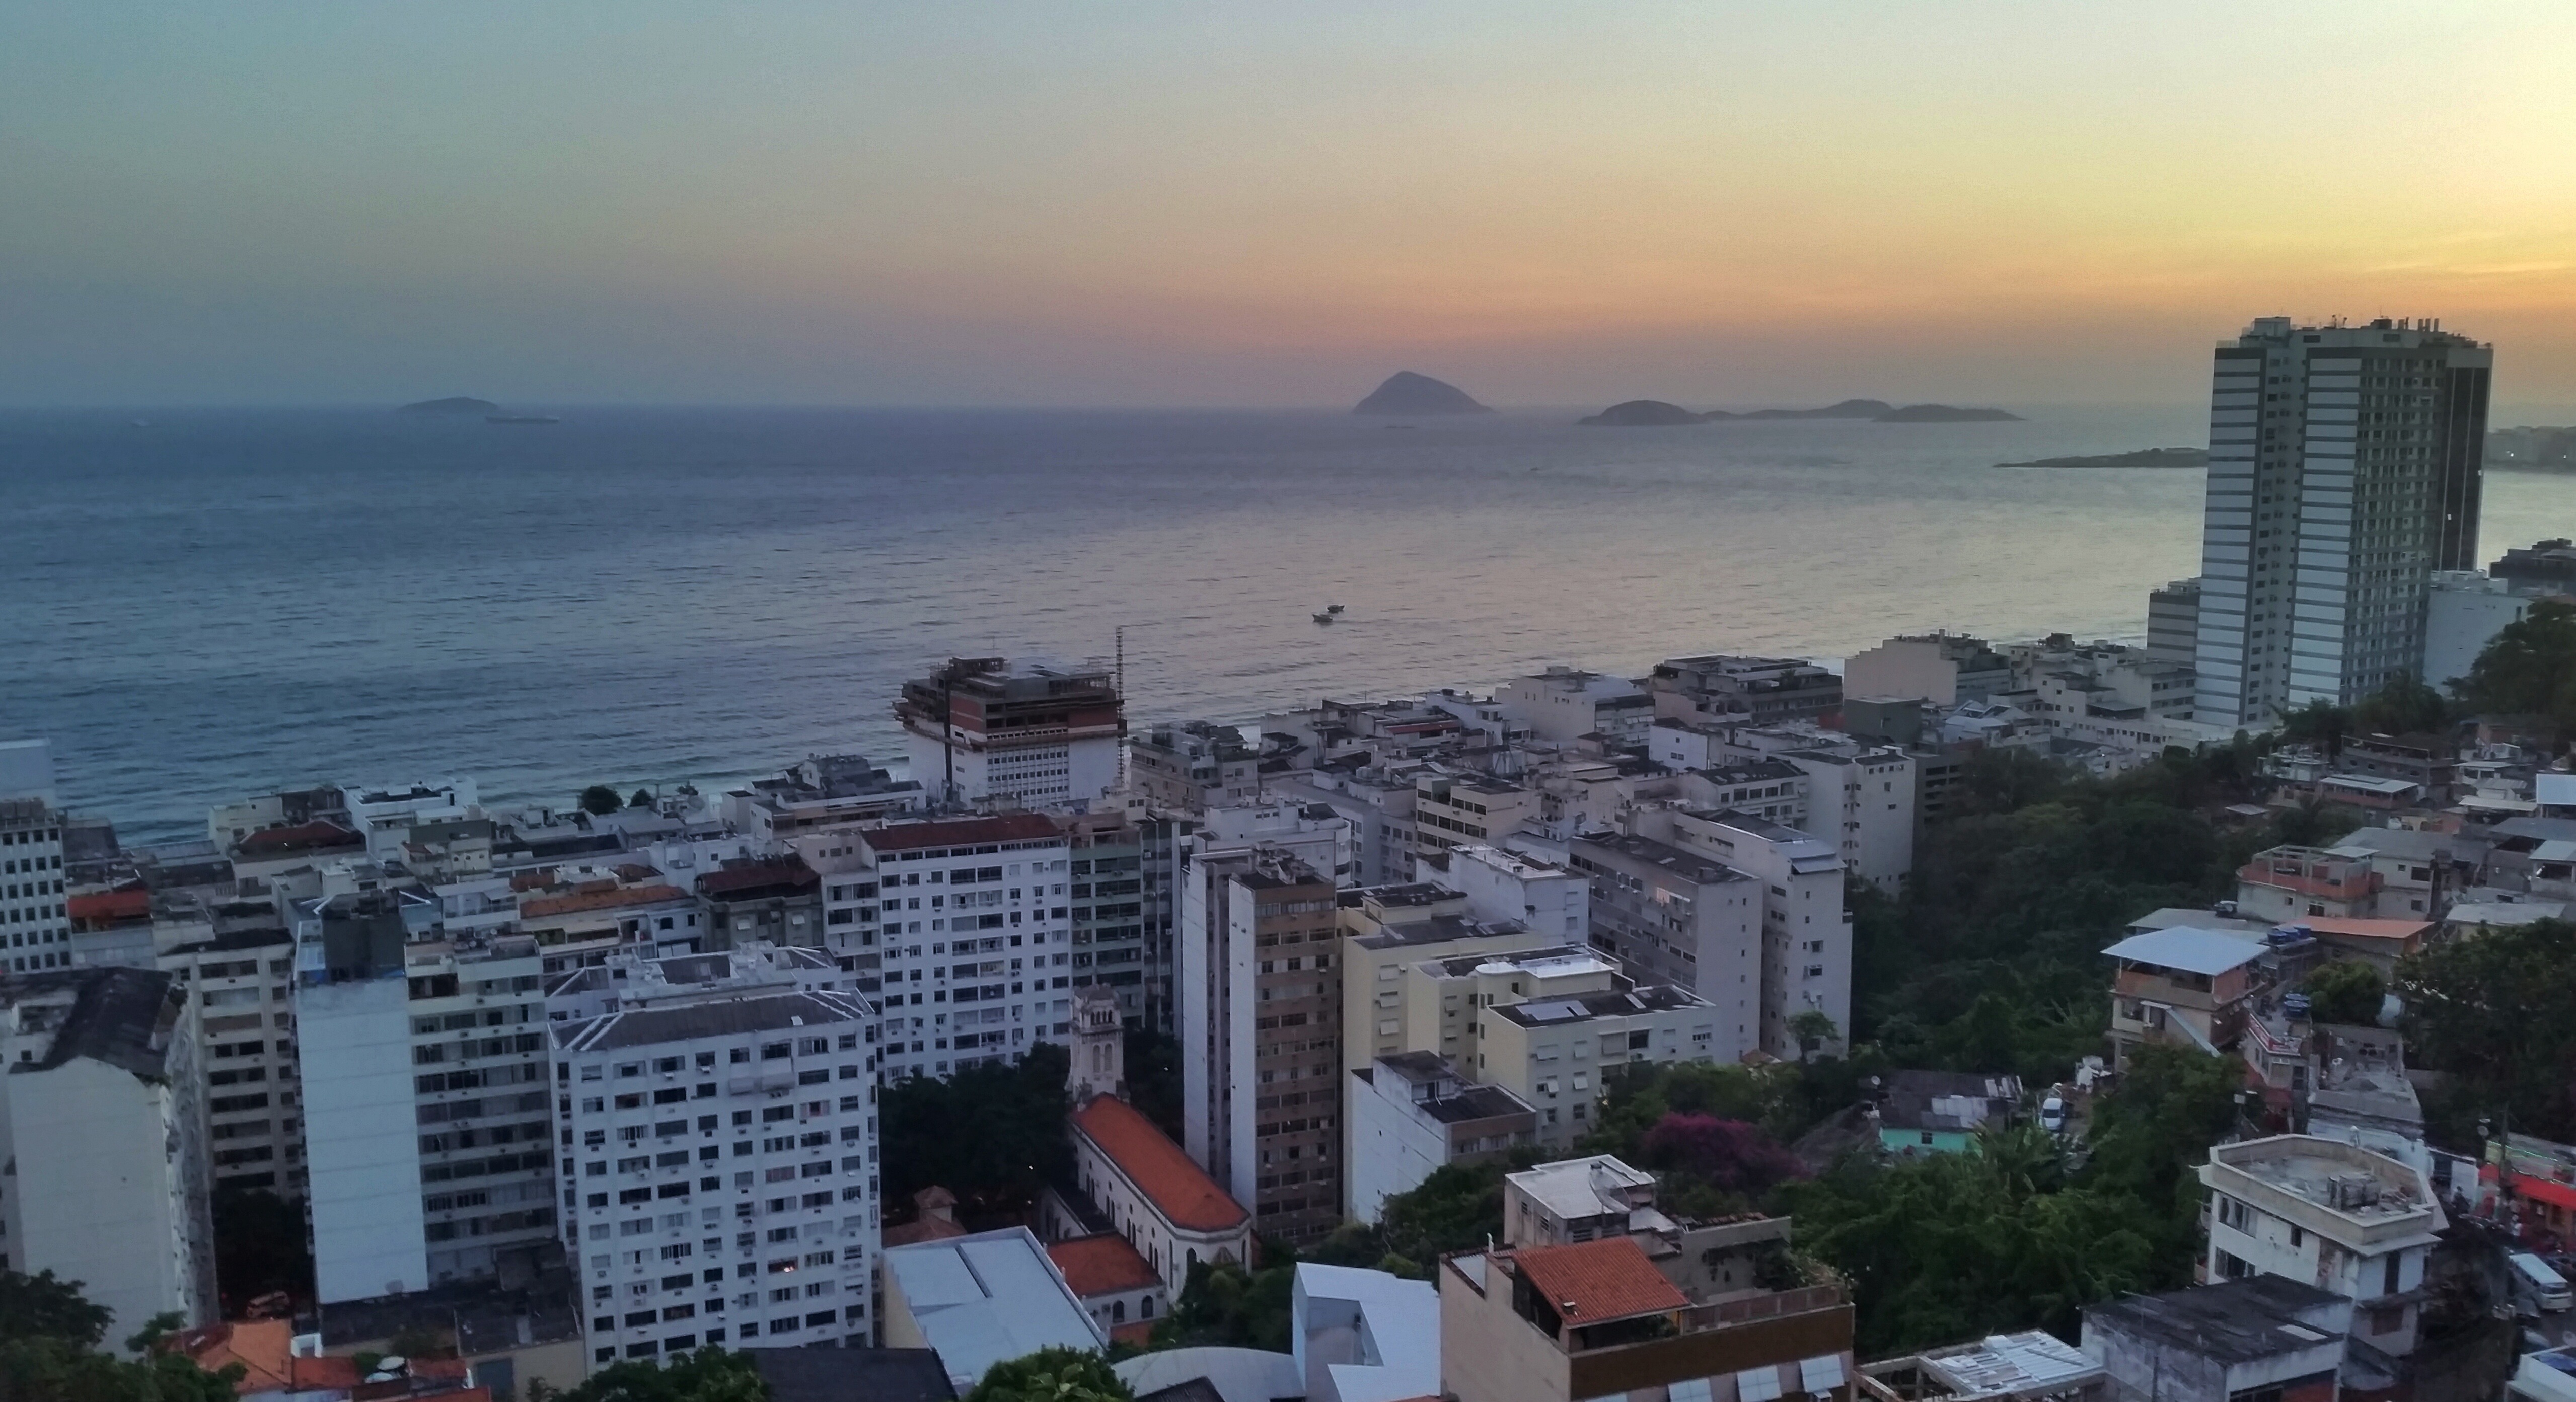 Is it safe for tourists to visit the favelas in Rio de Janeiro? View from a favela in Brazil